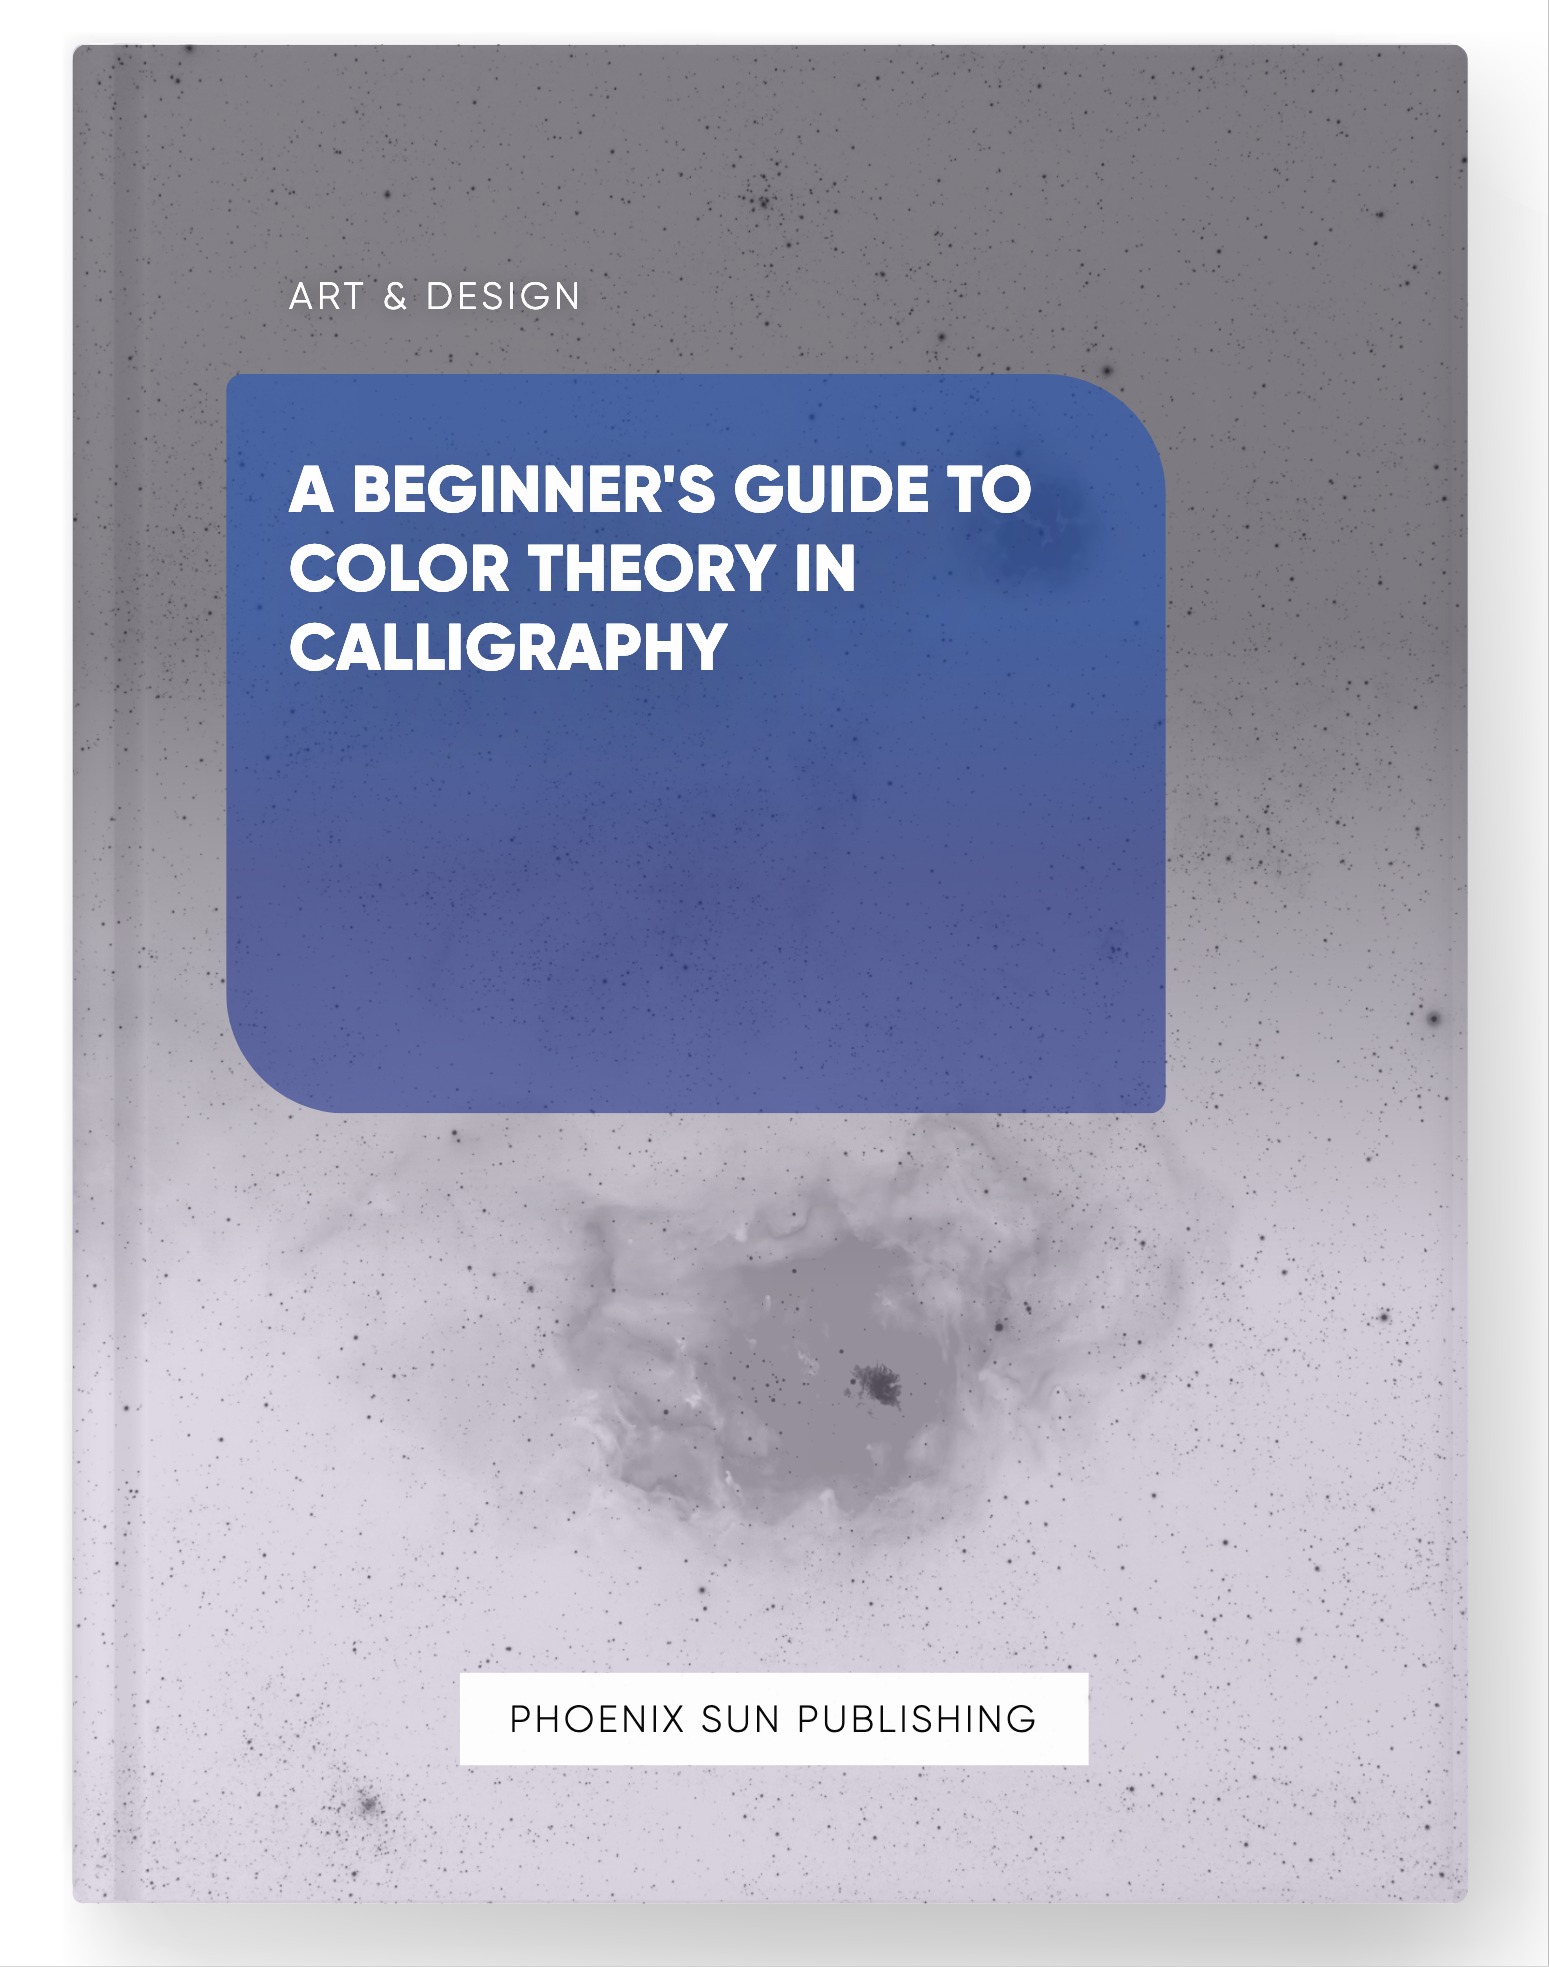 A Beginner’s Guide to Color Theory in Calligraphy